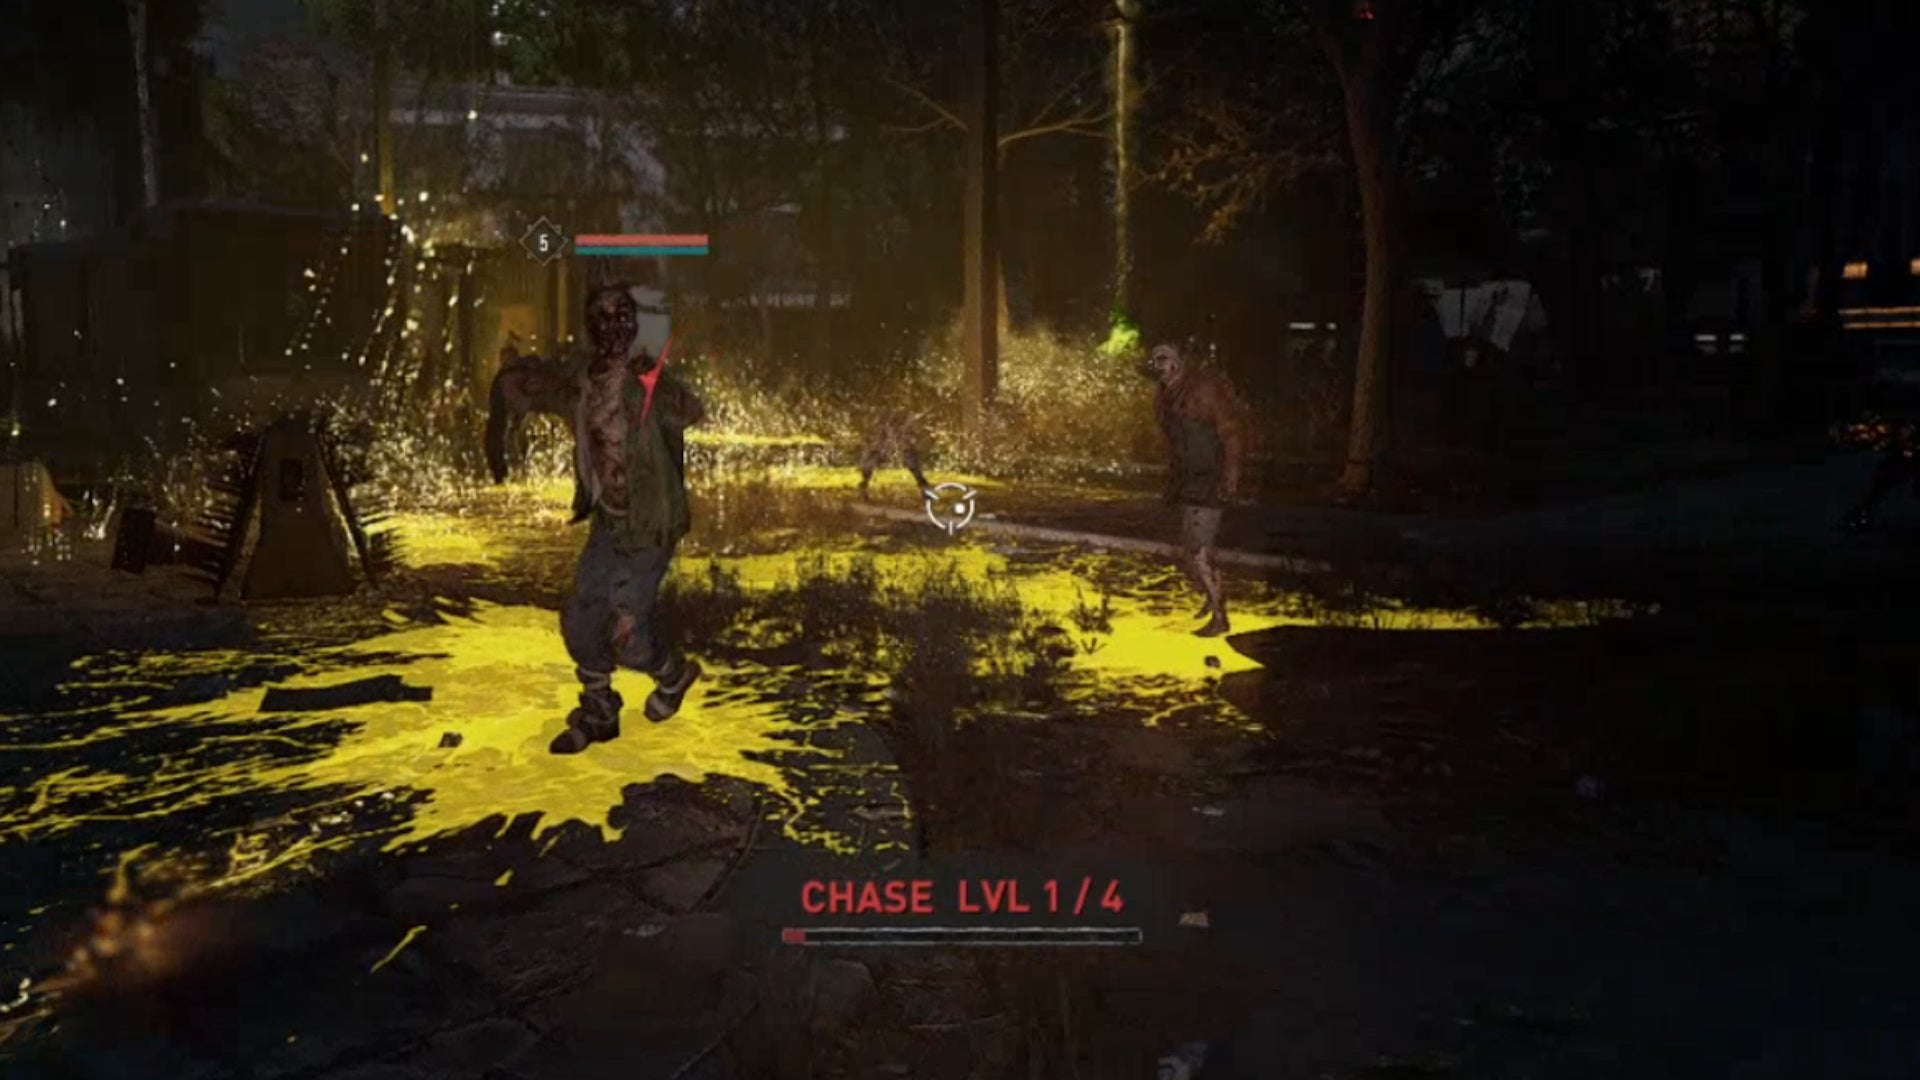 A zombie in Dying Light 2 shuffling towards the player as part of a nighttime chase.